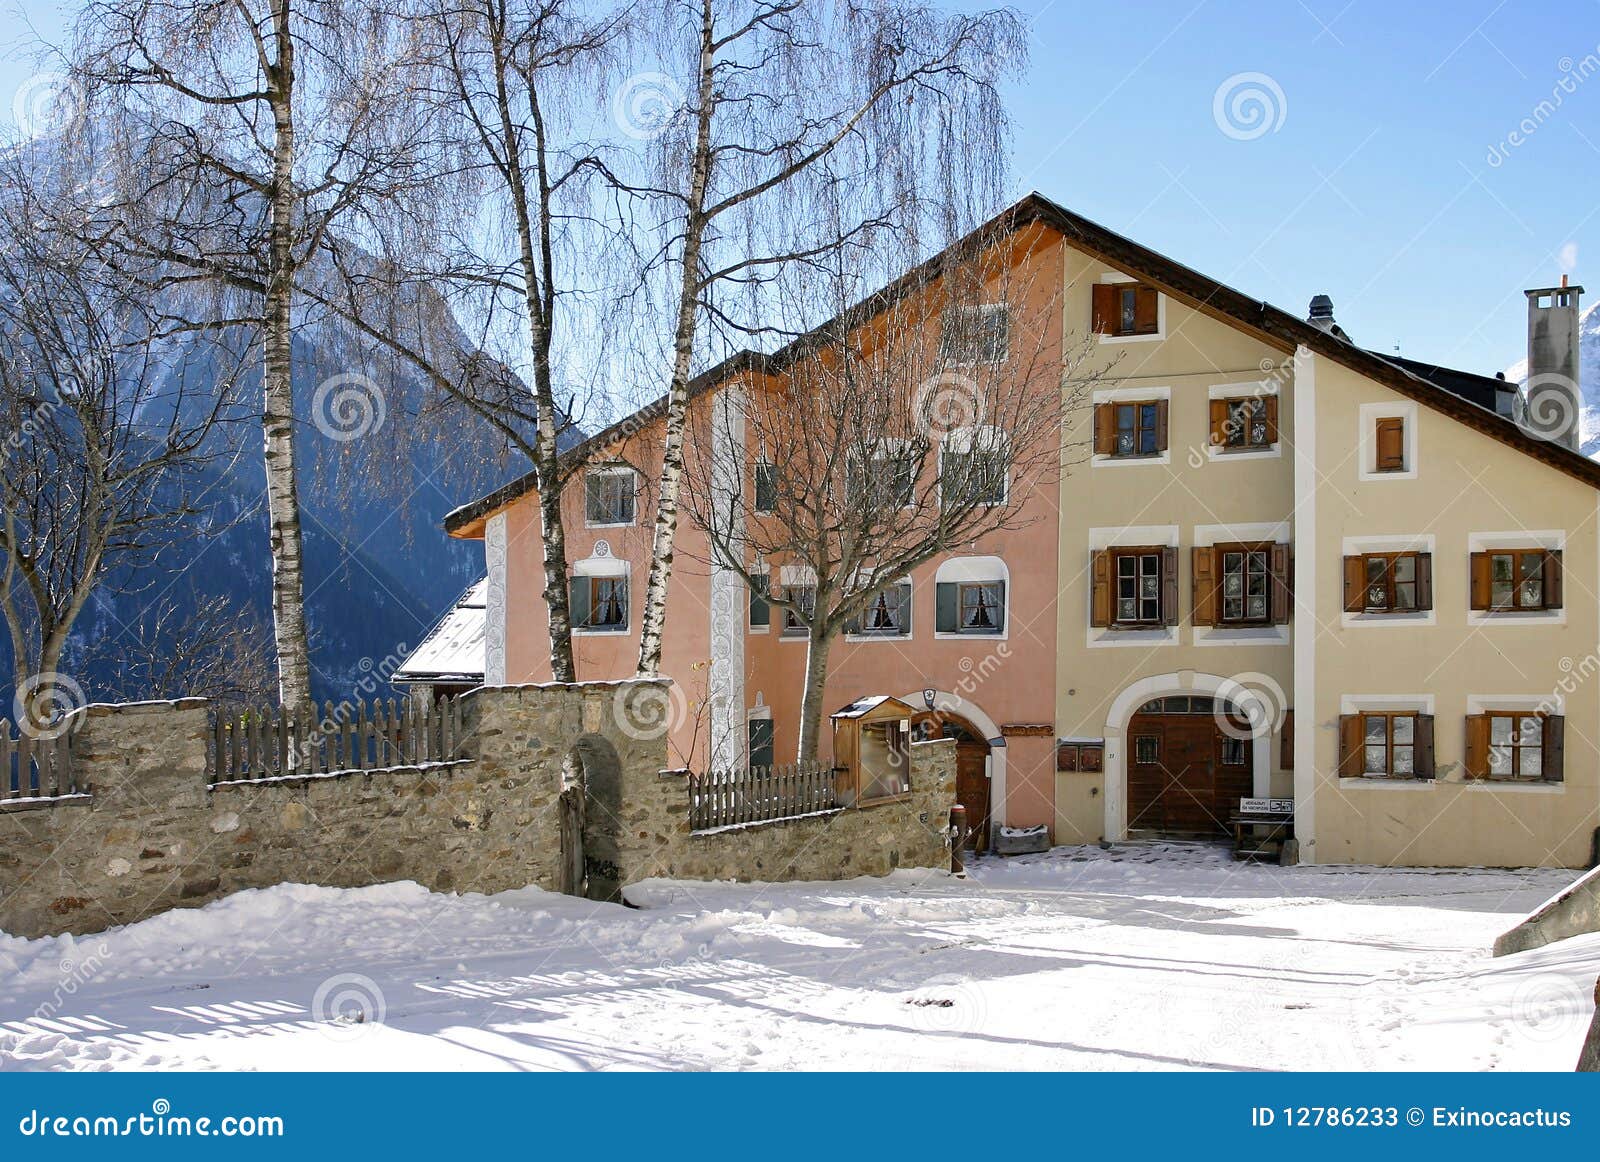 traditional house in engadin